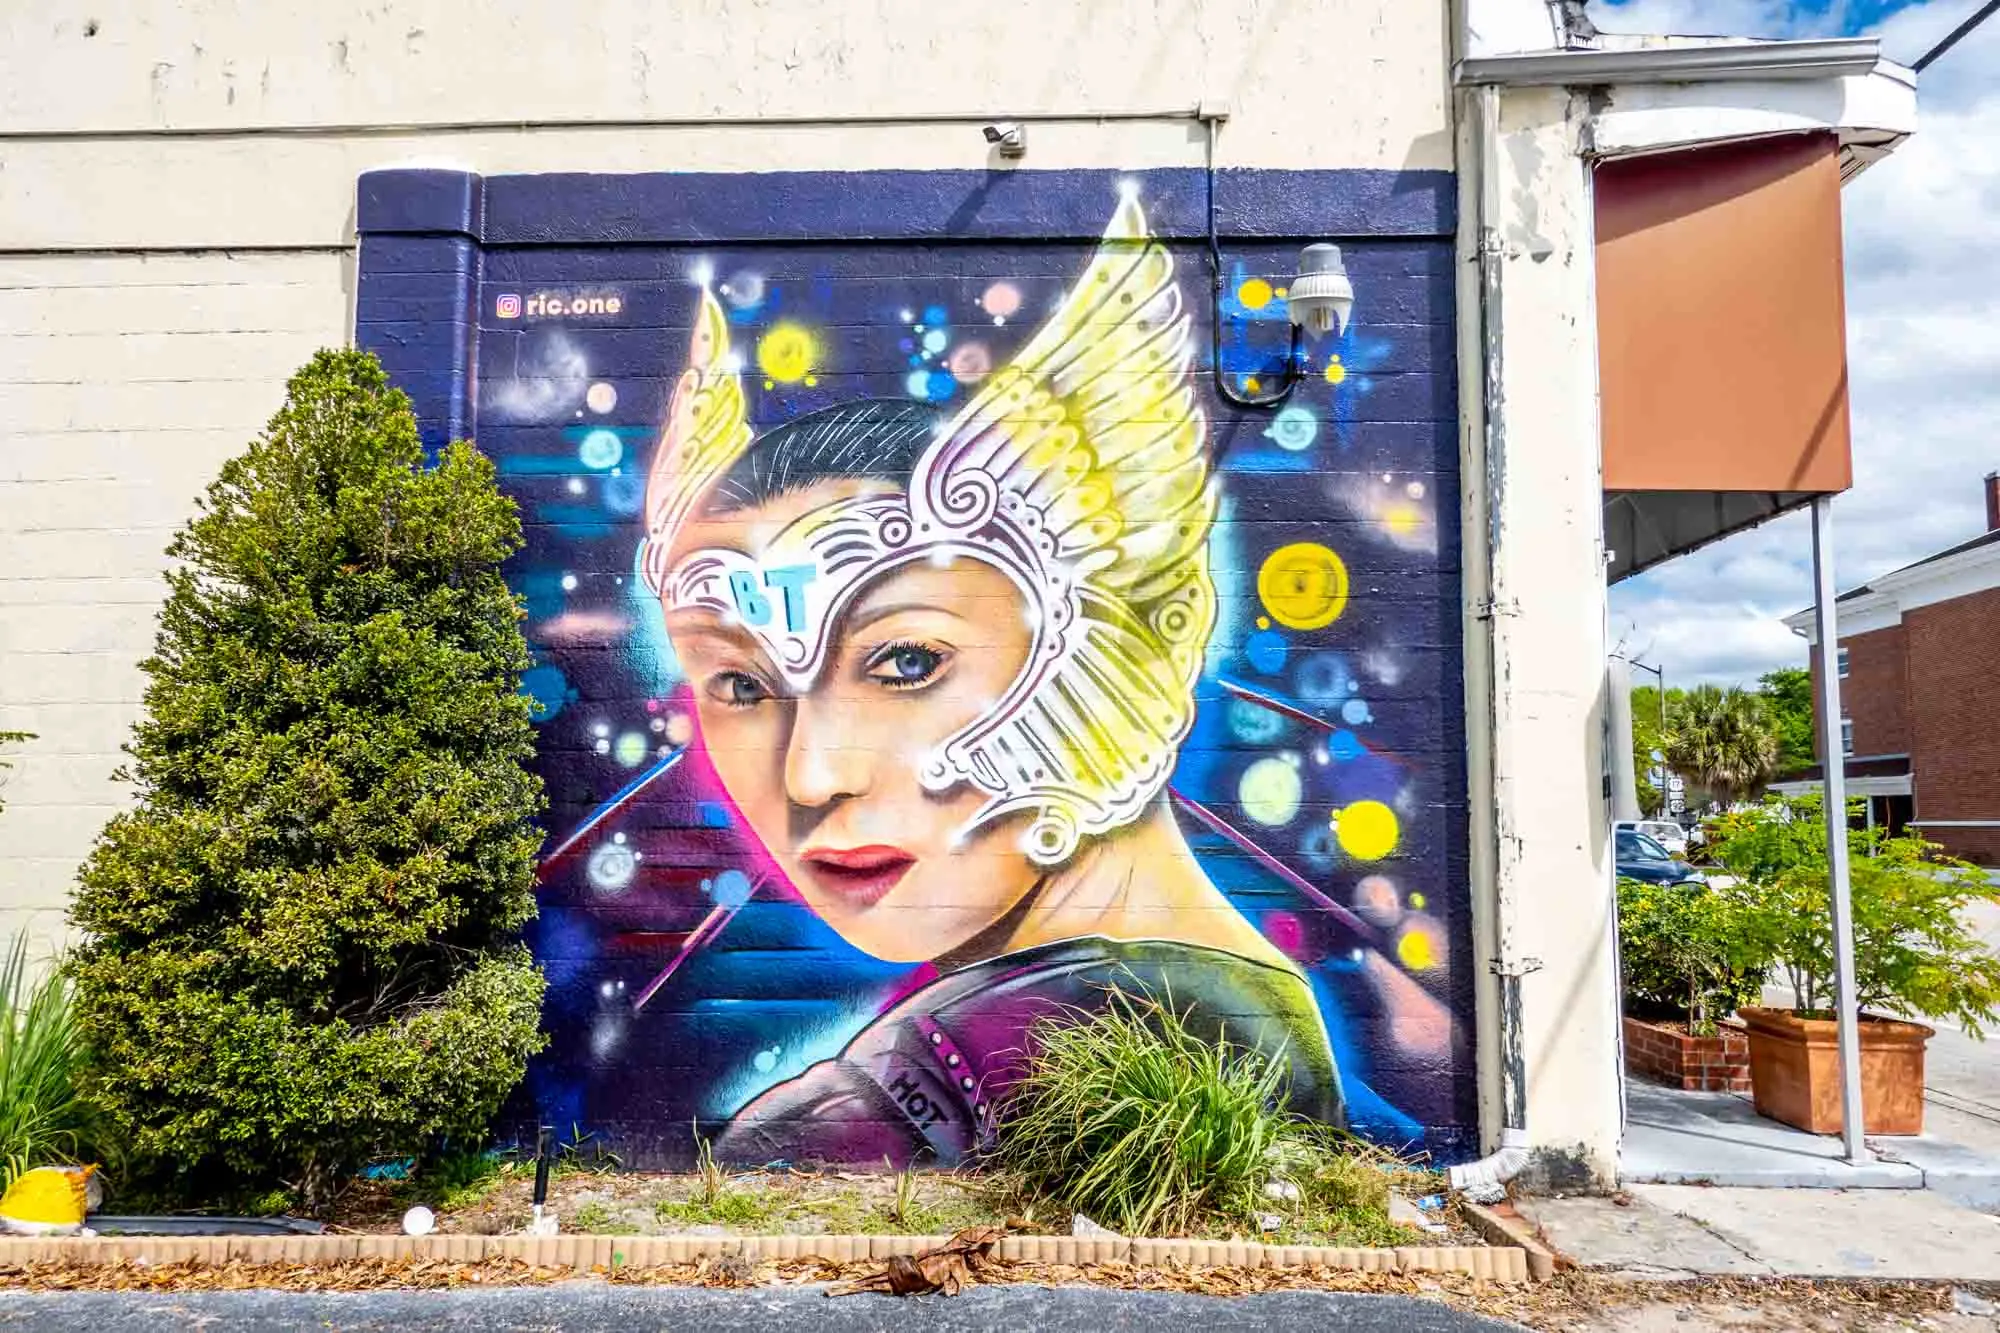 Street art mural of a woman wearing a purple costume and a headpiece with gold wings